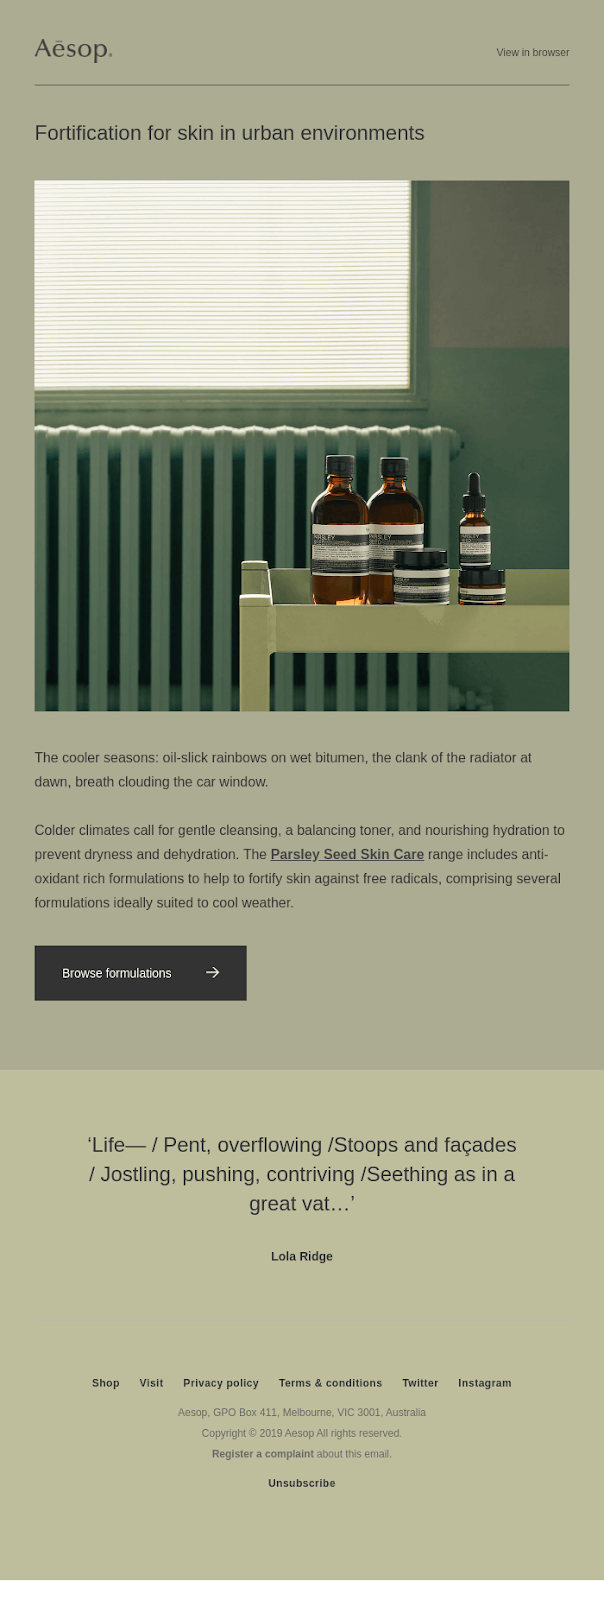 Aesop skincare product email highlighting urban skin protection